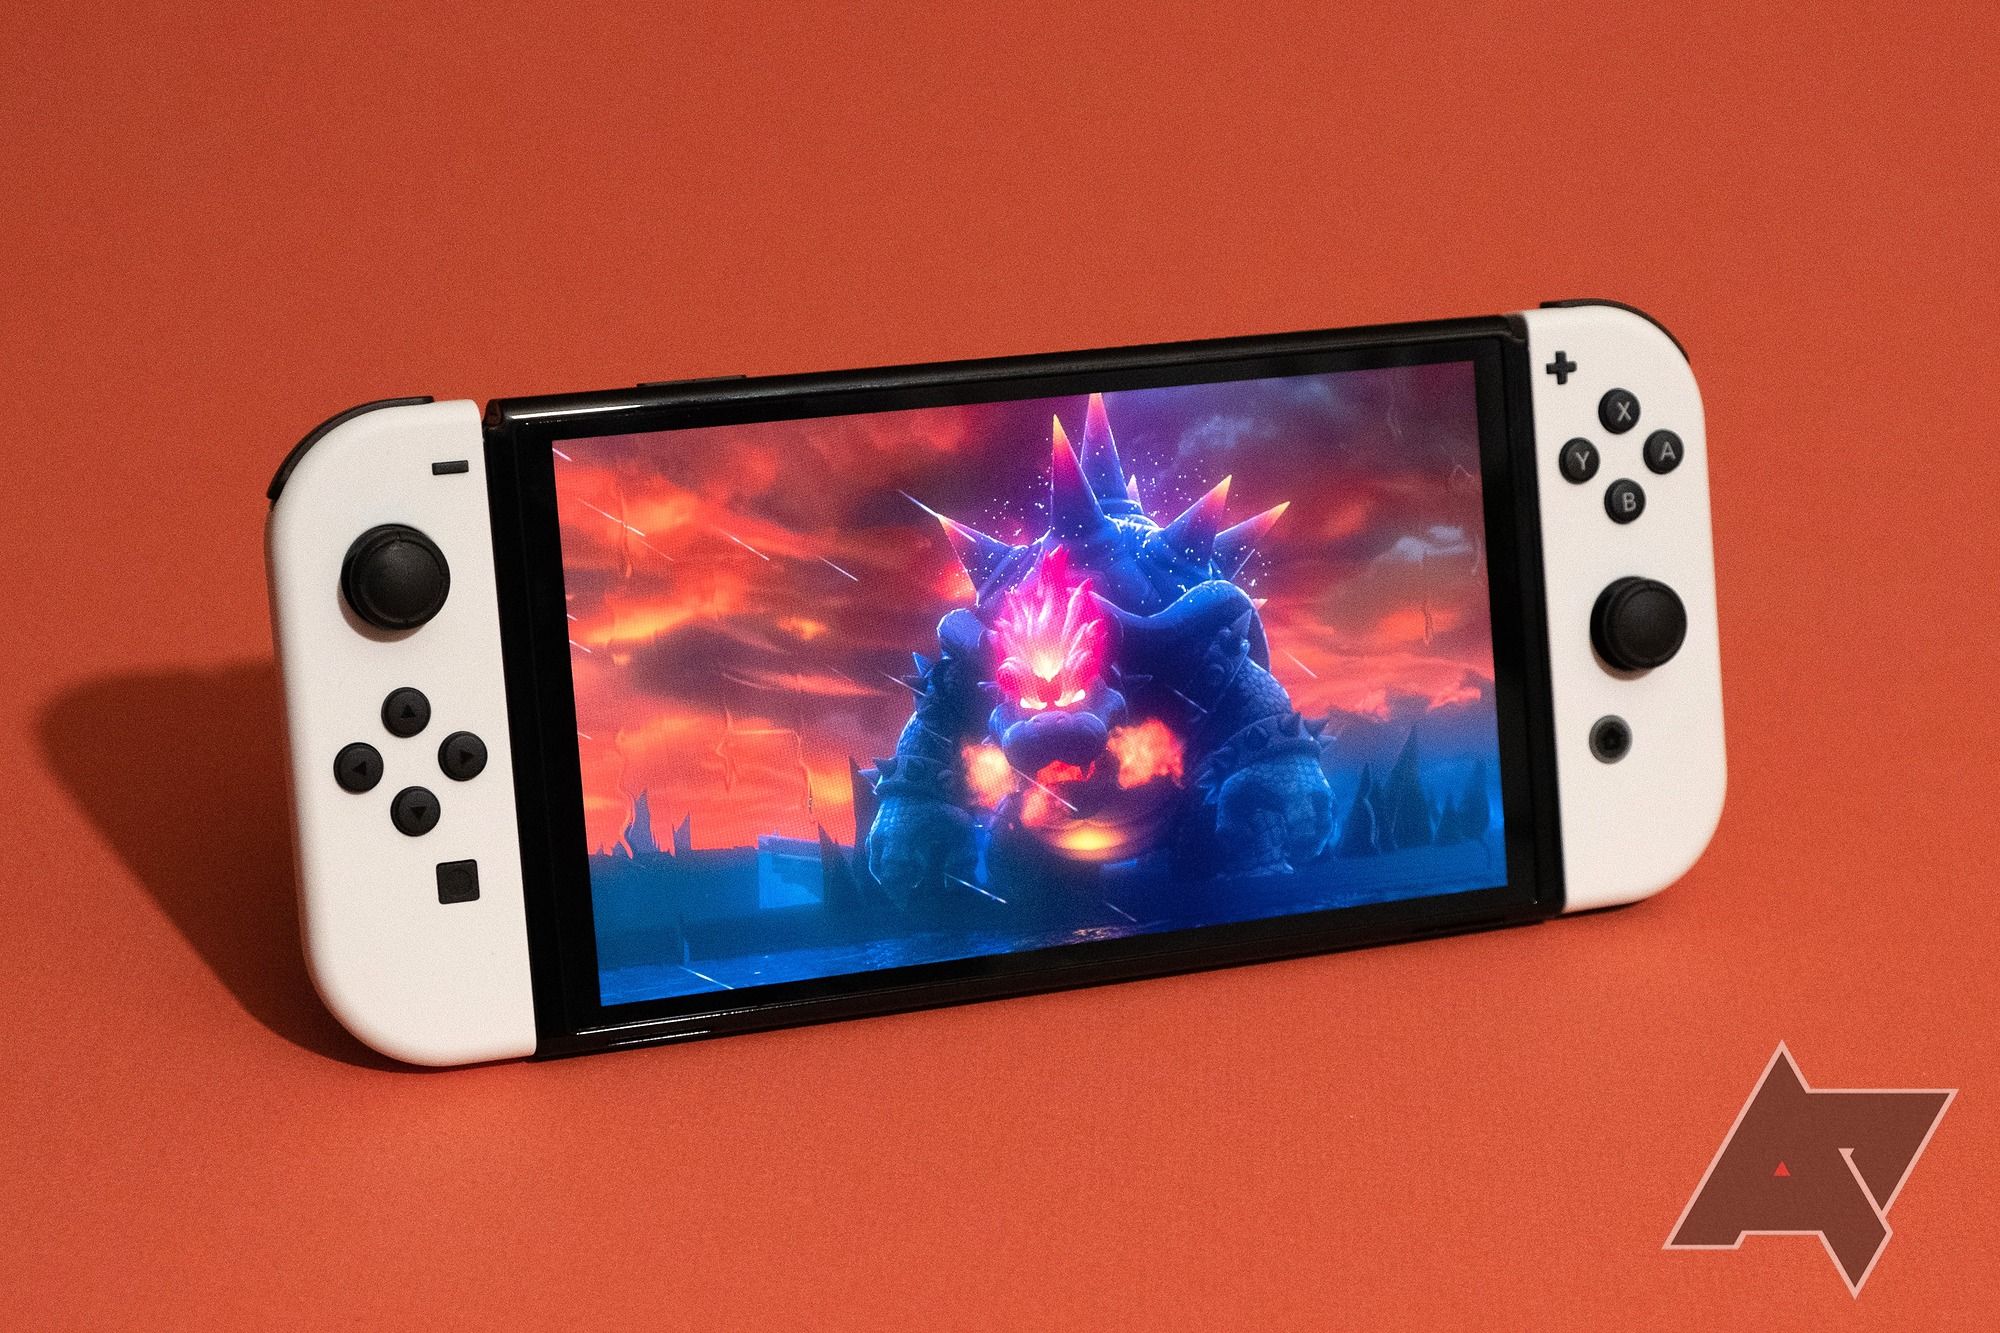 Best Android Switch Emulator: Play Nintendo Switch on Android